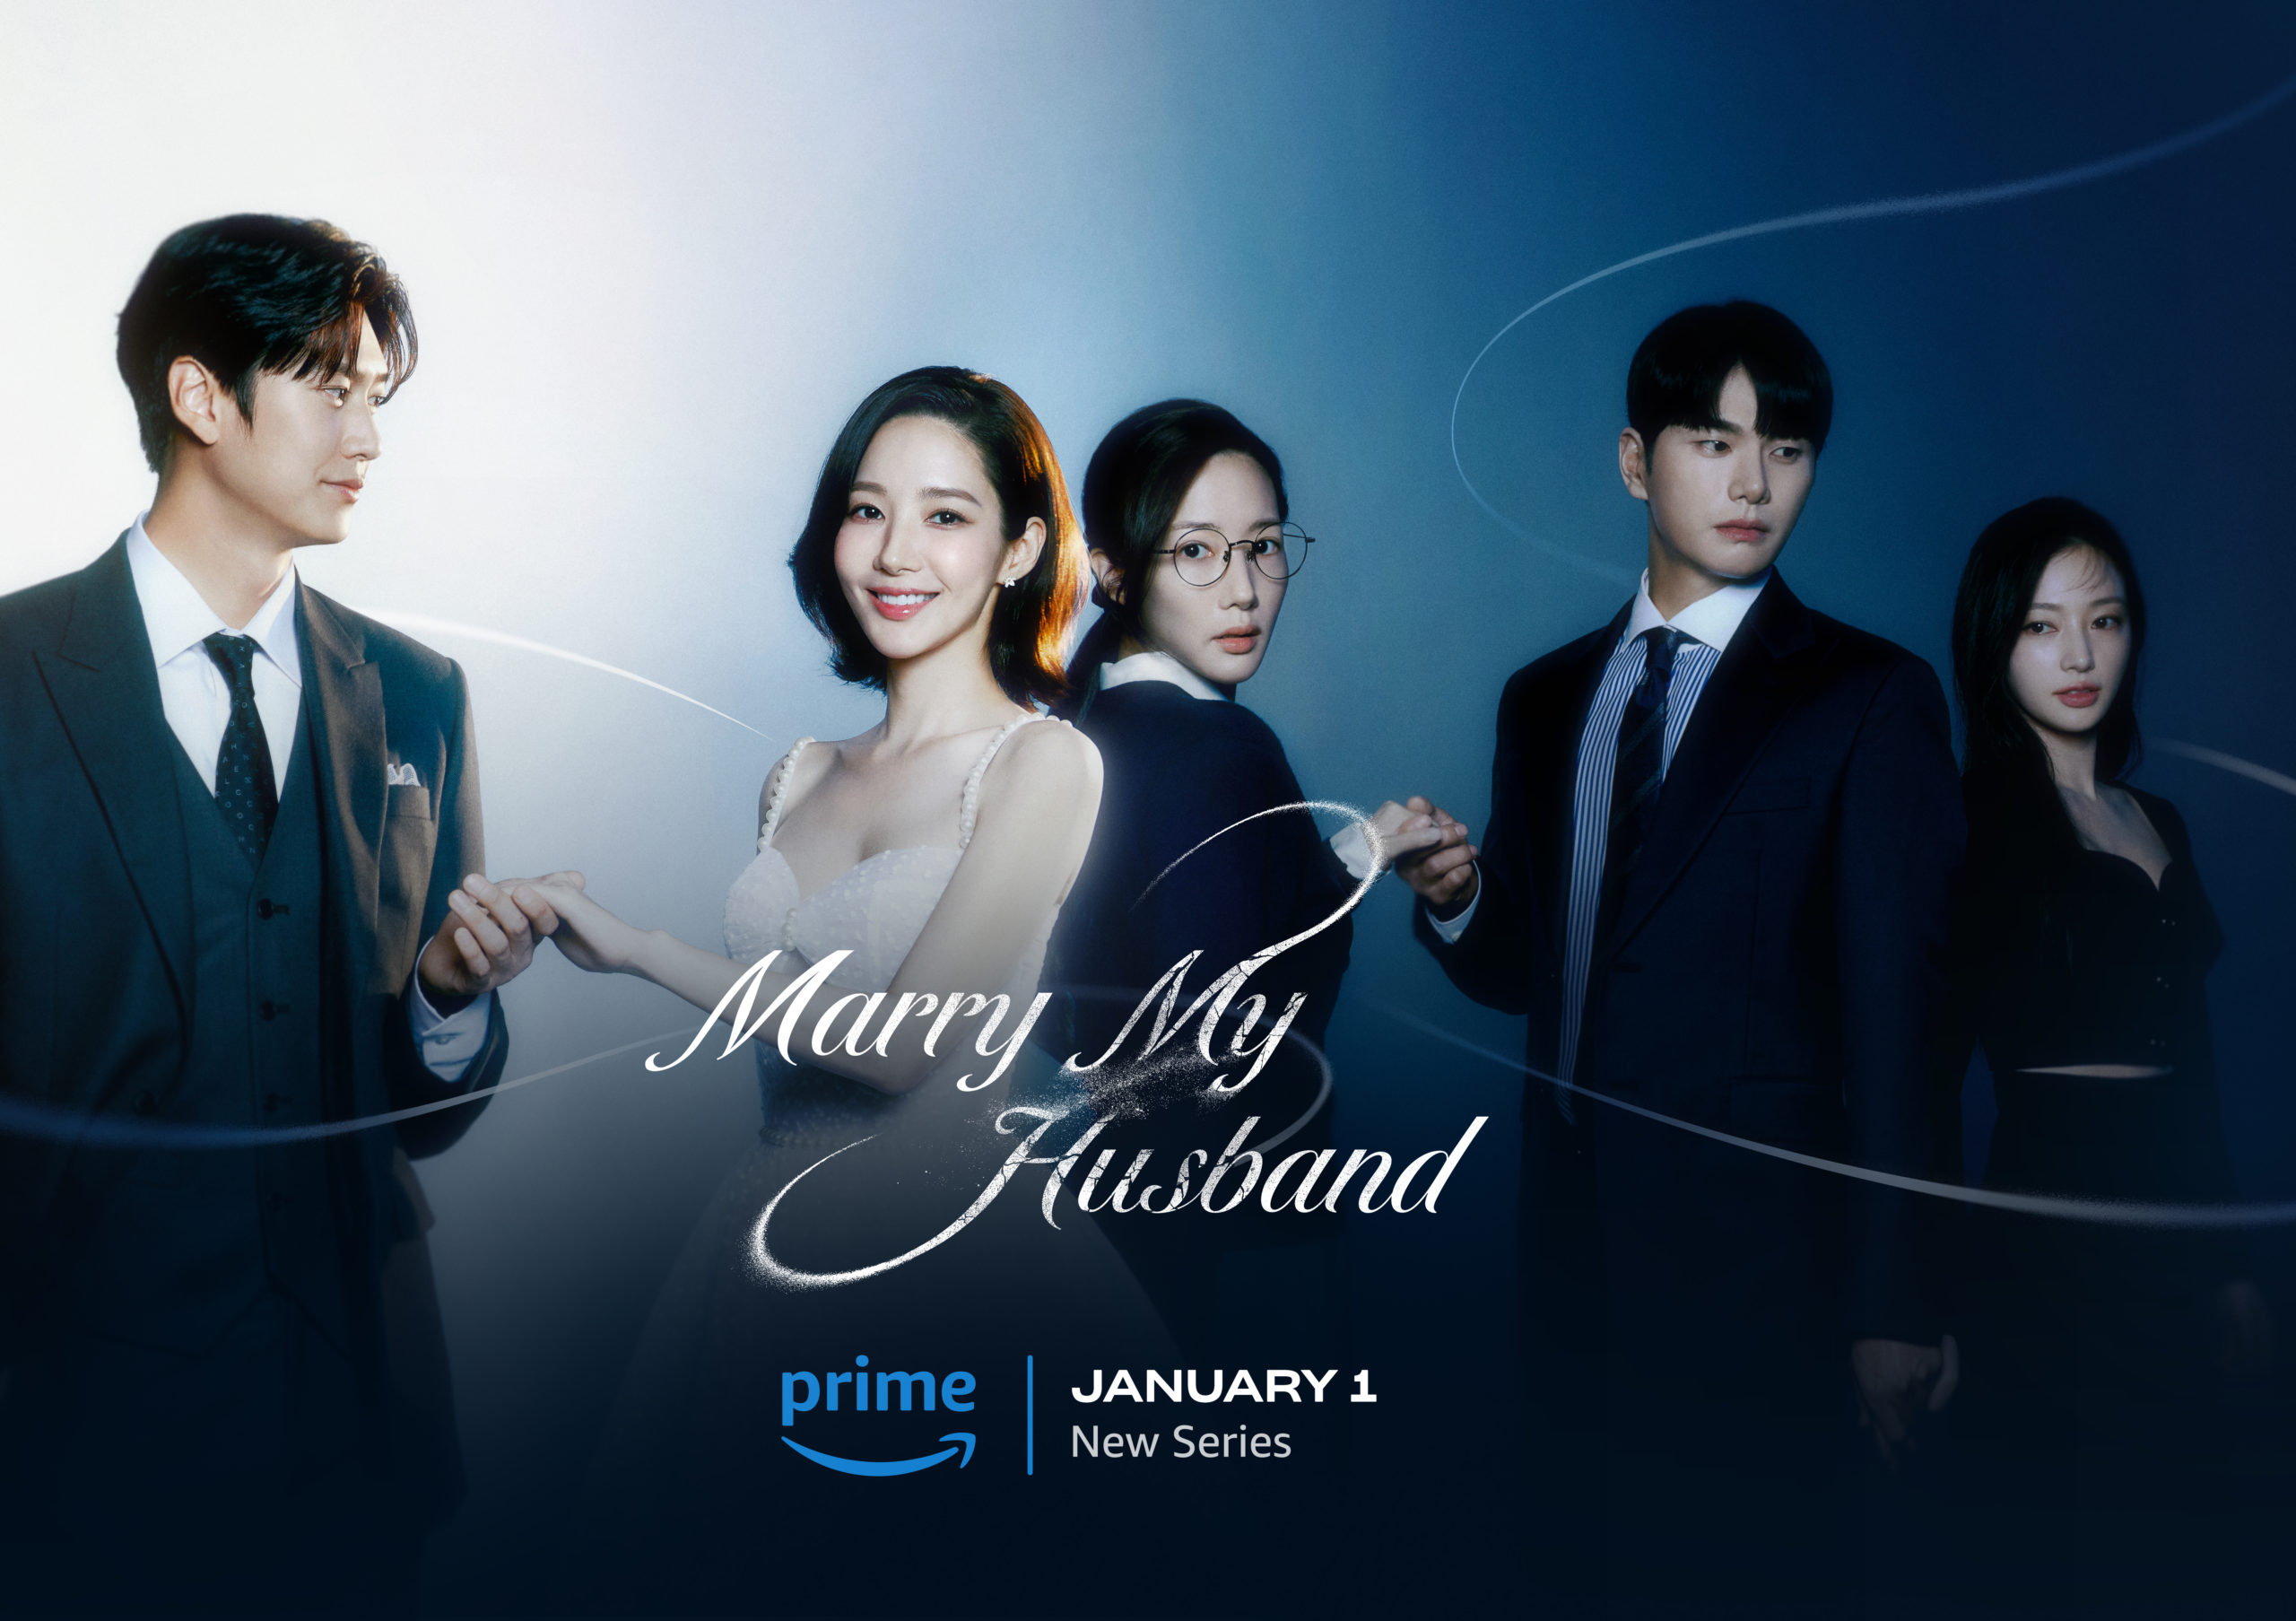 "Marry My Husband" Starring Queen Park Min Young Is Coming